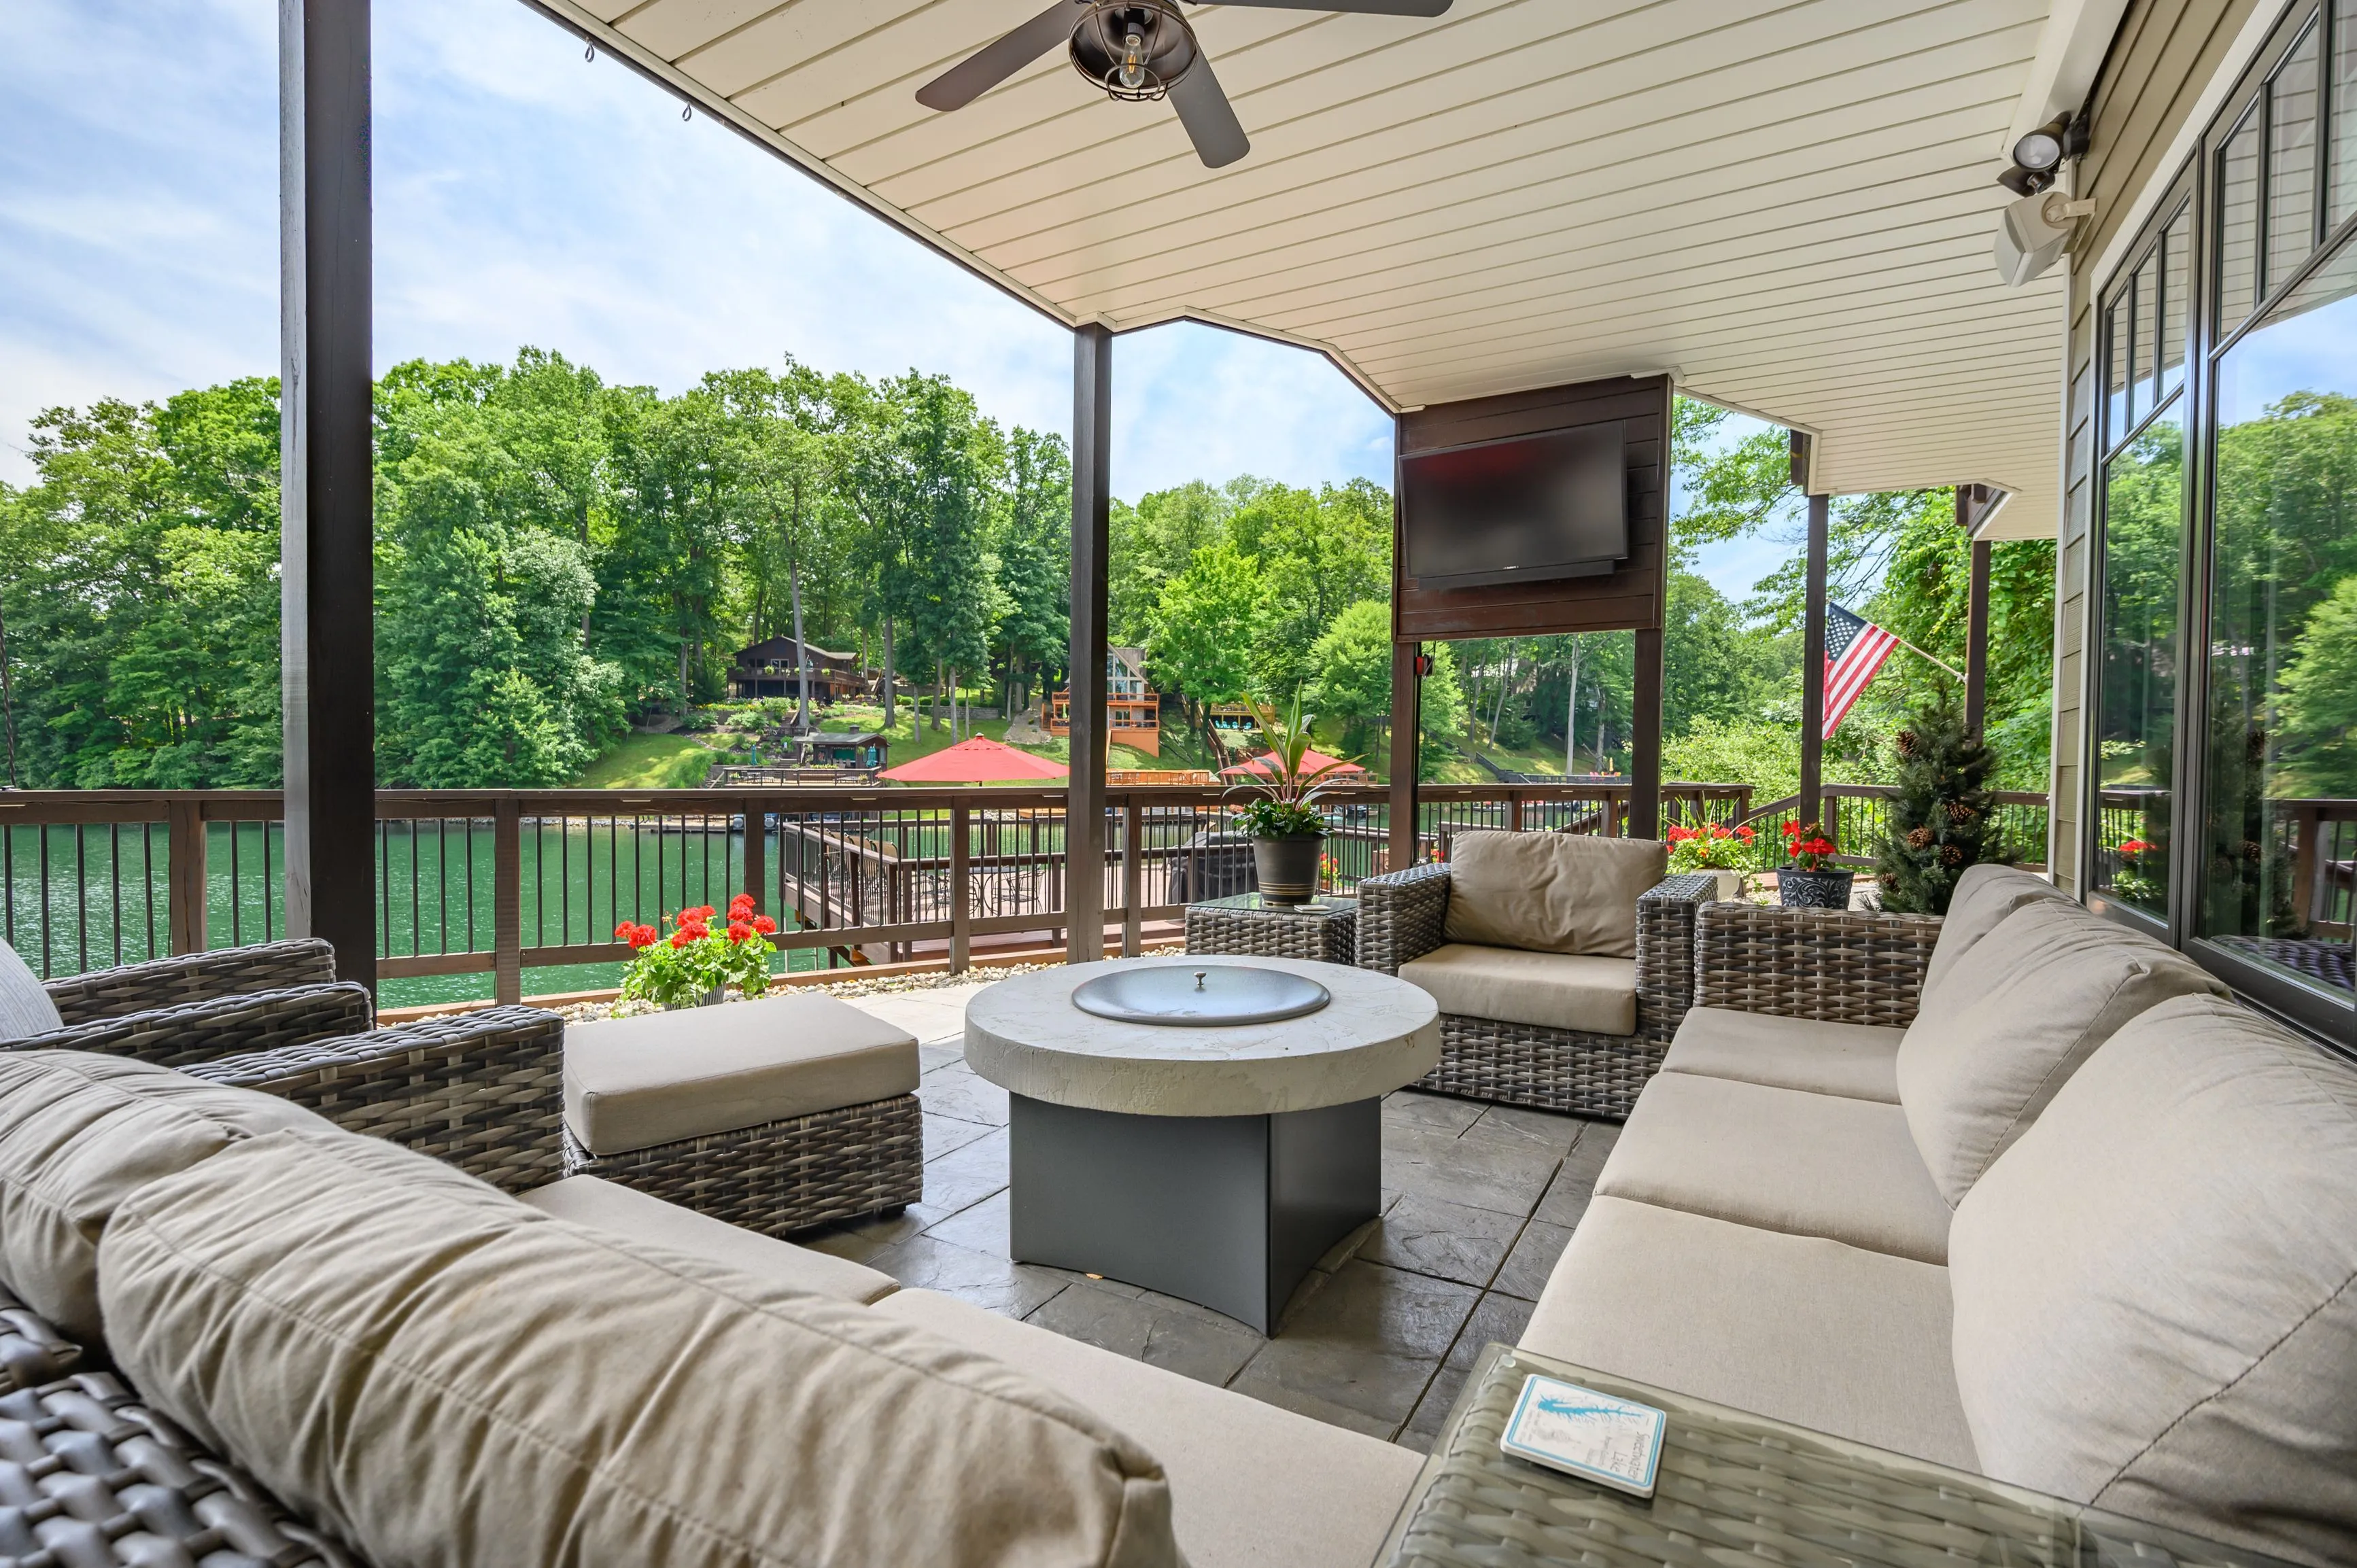 Covered patio area with comfortable outdoor seating, a fire pit, and a lush green forest view in the background.